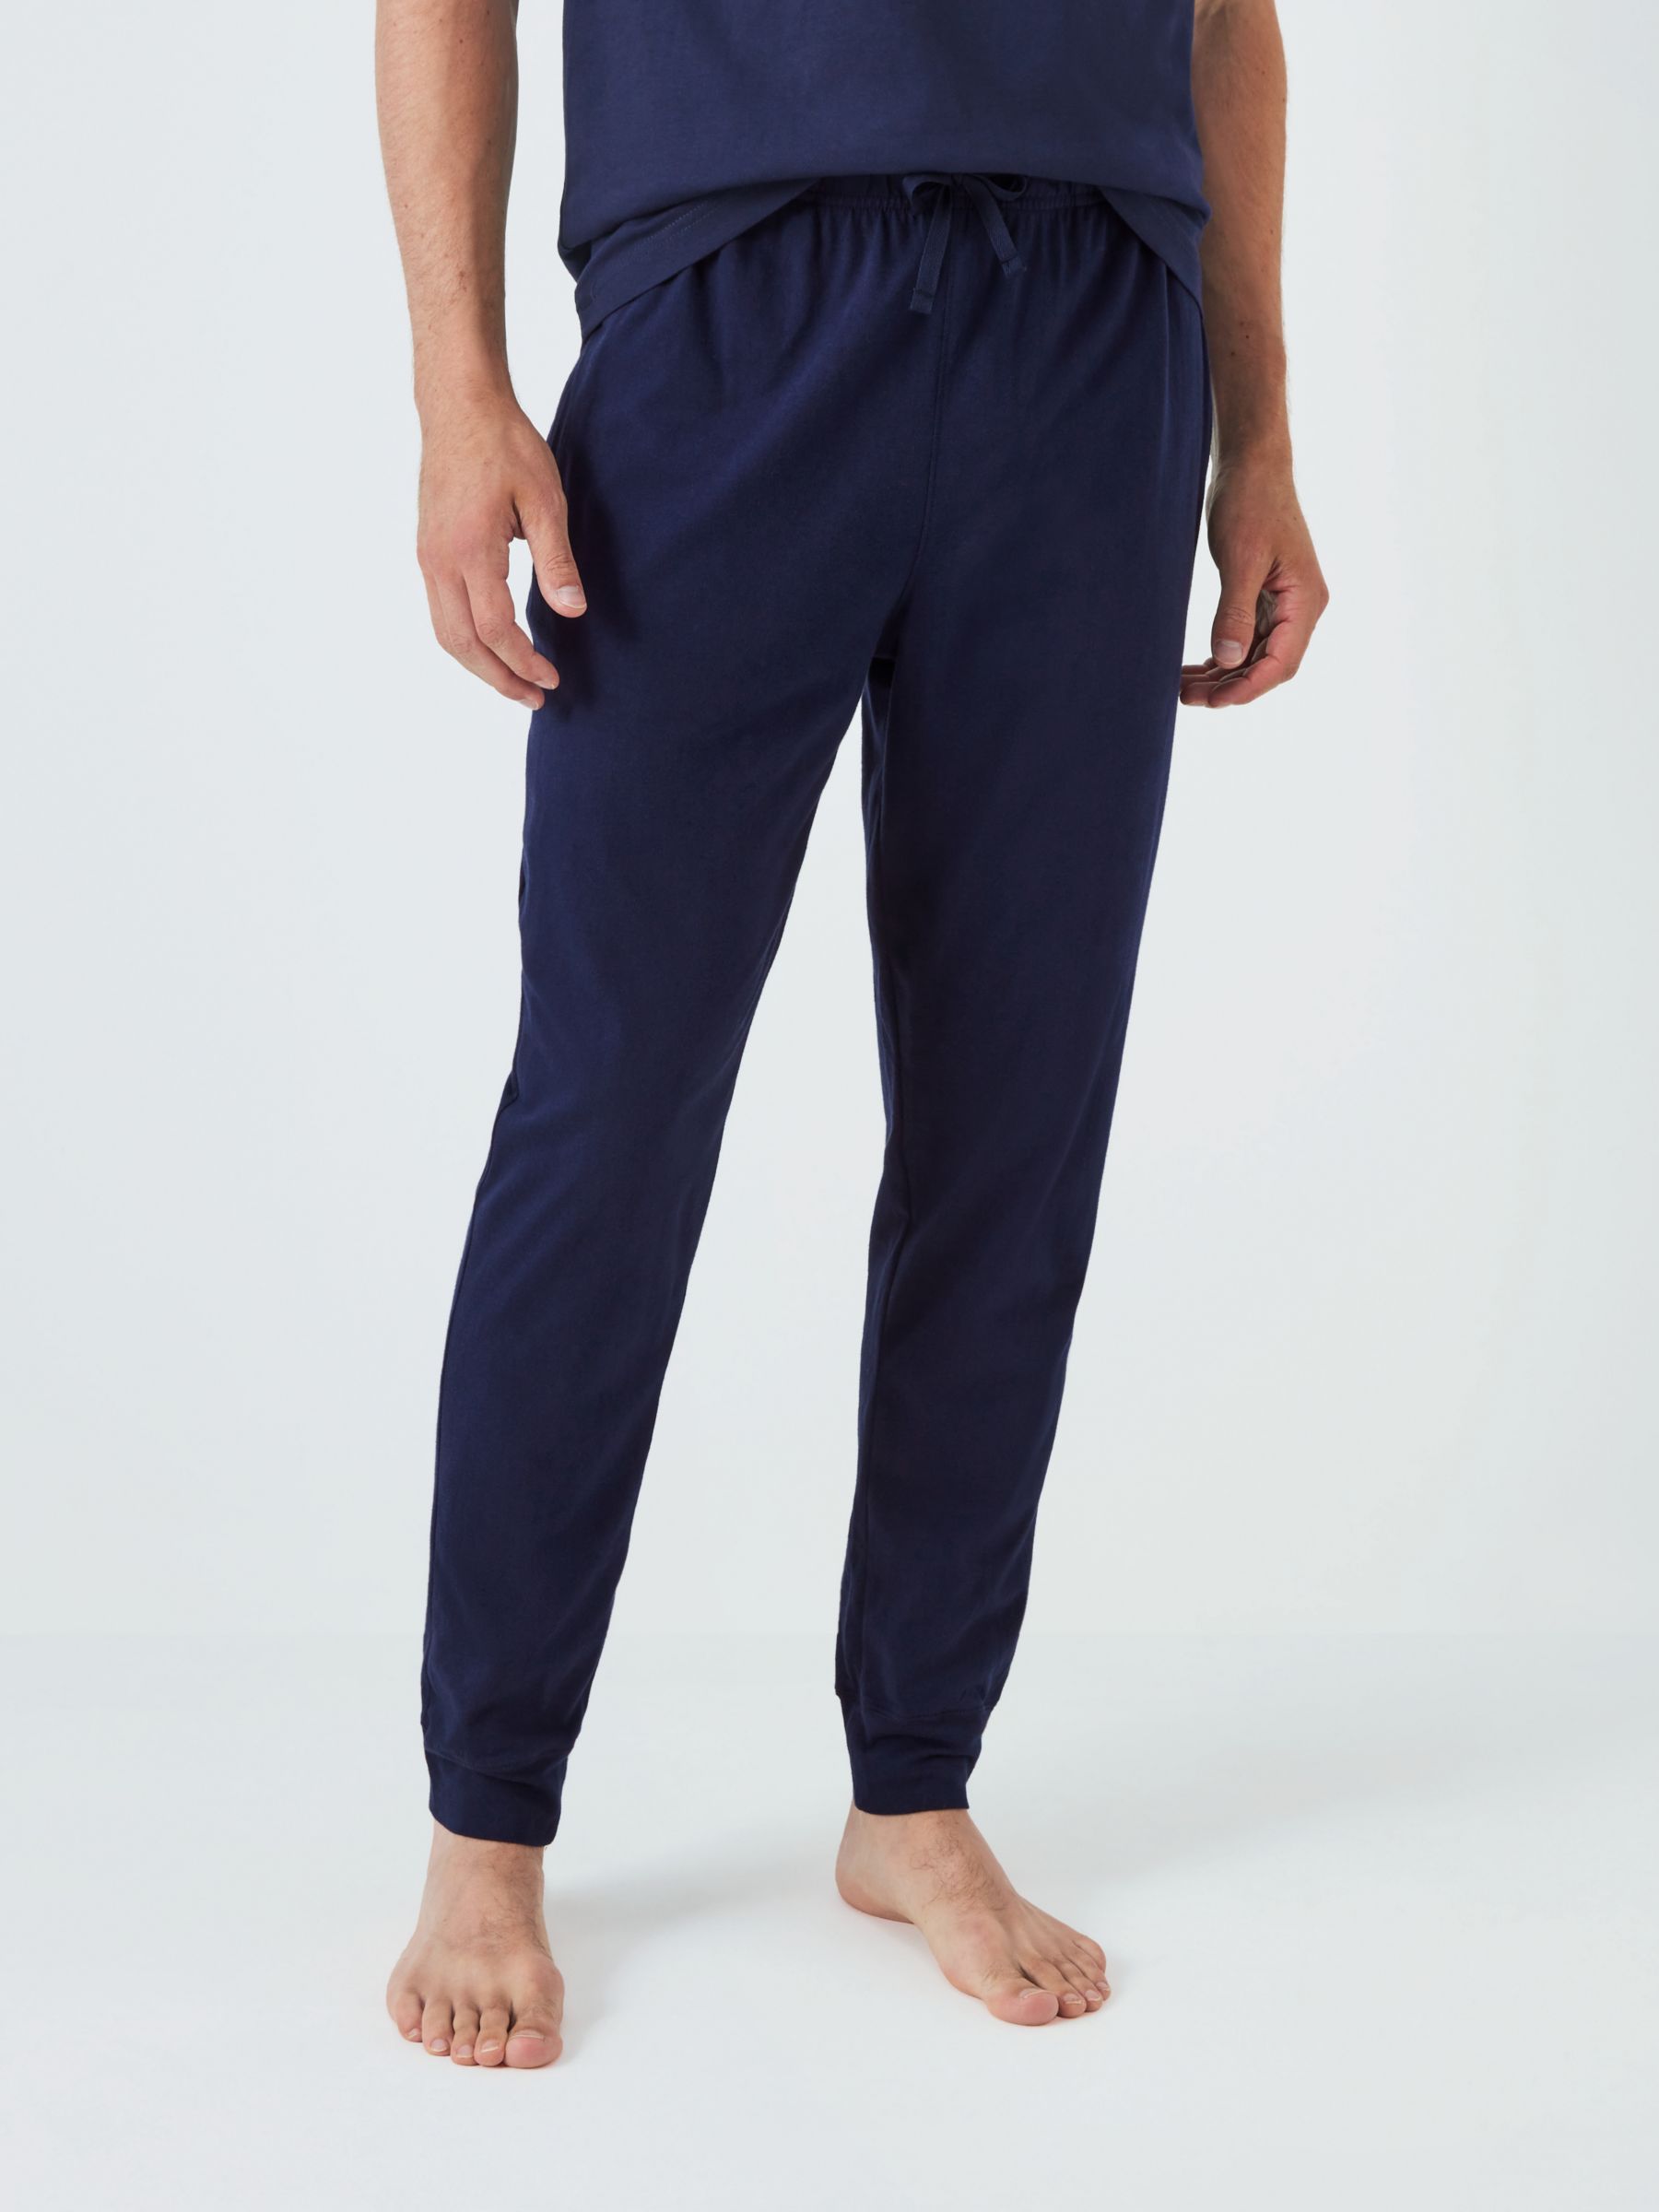 John Lewis ANYDAY Cotton Jersey Joggers, Pack of 2, Navy/Grey at John ...